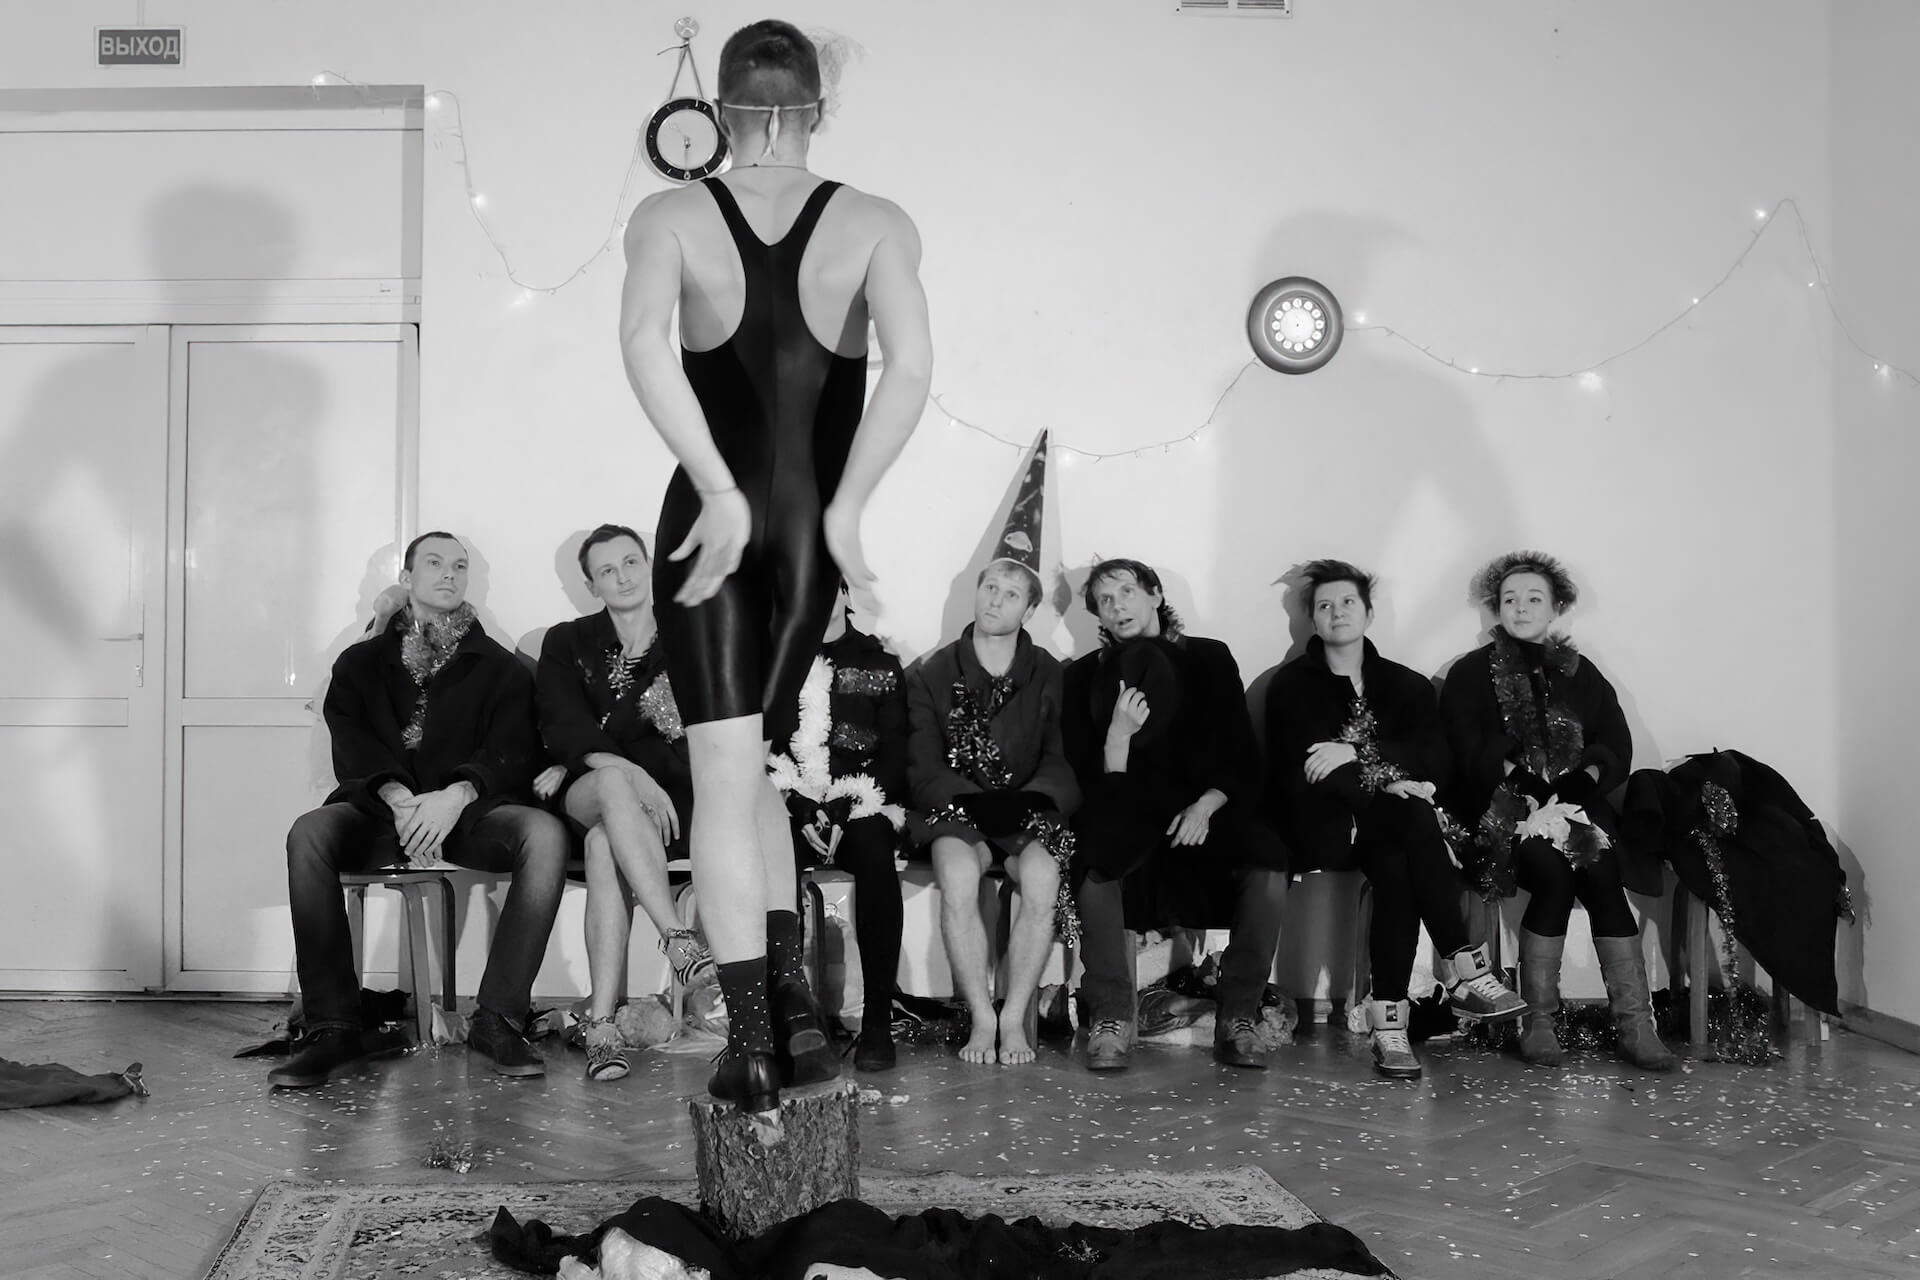 Black and white image of a performer standing in a middle showing off a dance move while the others sit on a chair and watch